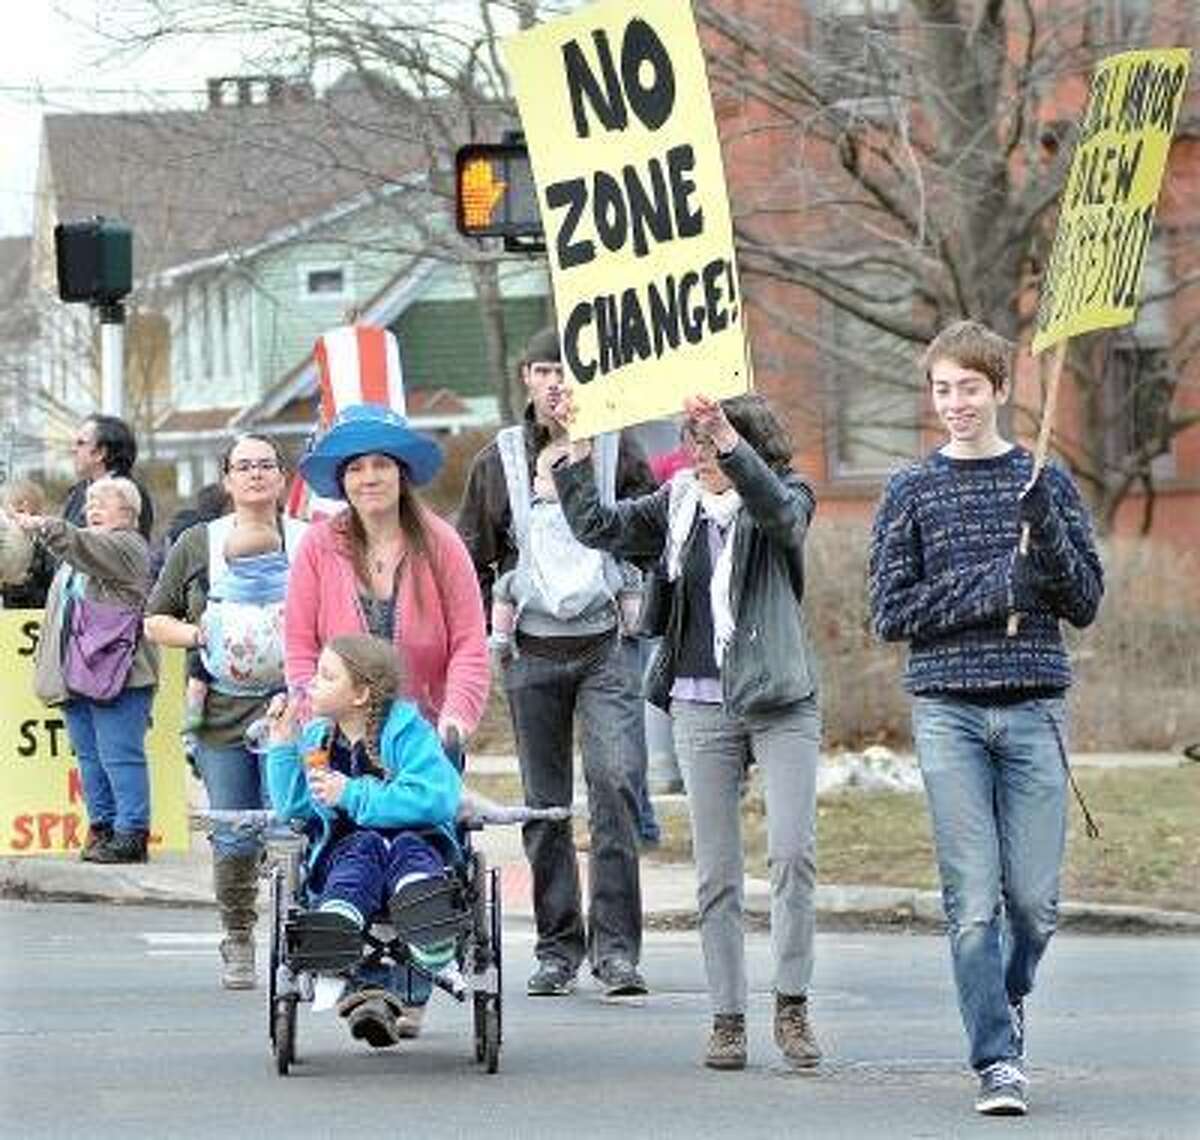 Catherine Avalone/The Middletown Press Approximately 40 Middletown residents protested carrying signs at the cross walk Monday at the intersection of Washington and High Streets in response to developer Robert Landino's proposal to change zoning for a portion of Washington Street in Middletown.